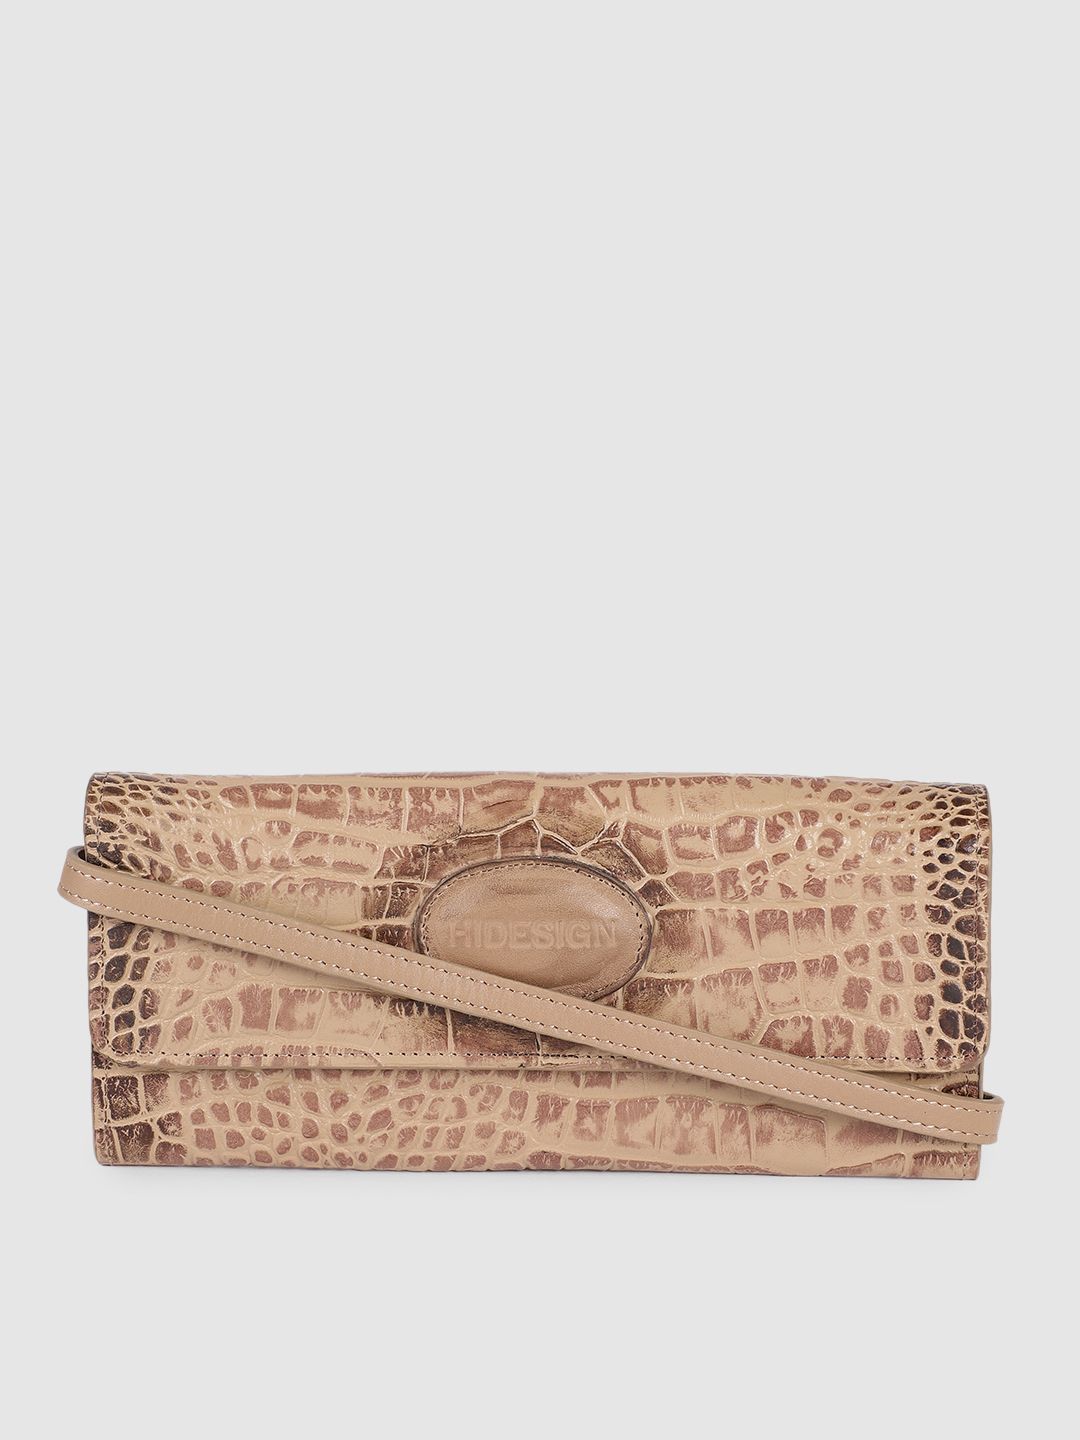 Hidesign Women Nude Animal Textured Leather Envelope Wallet Price in India